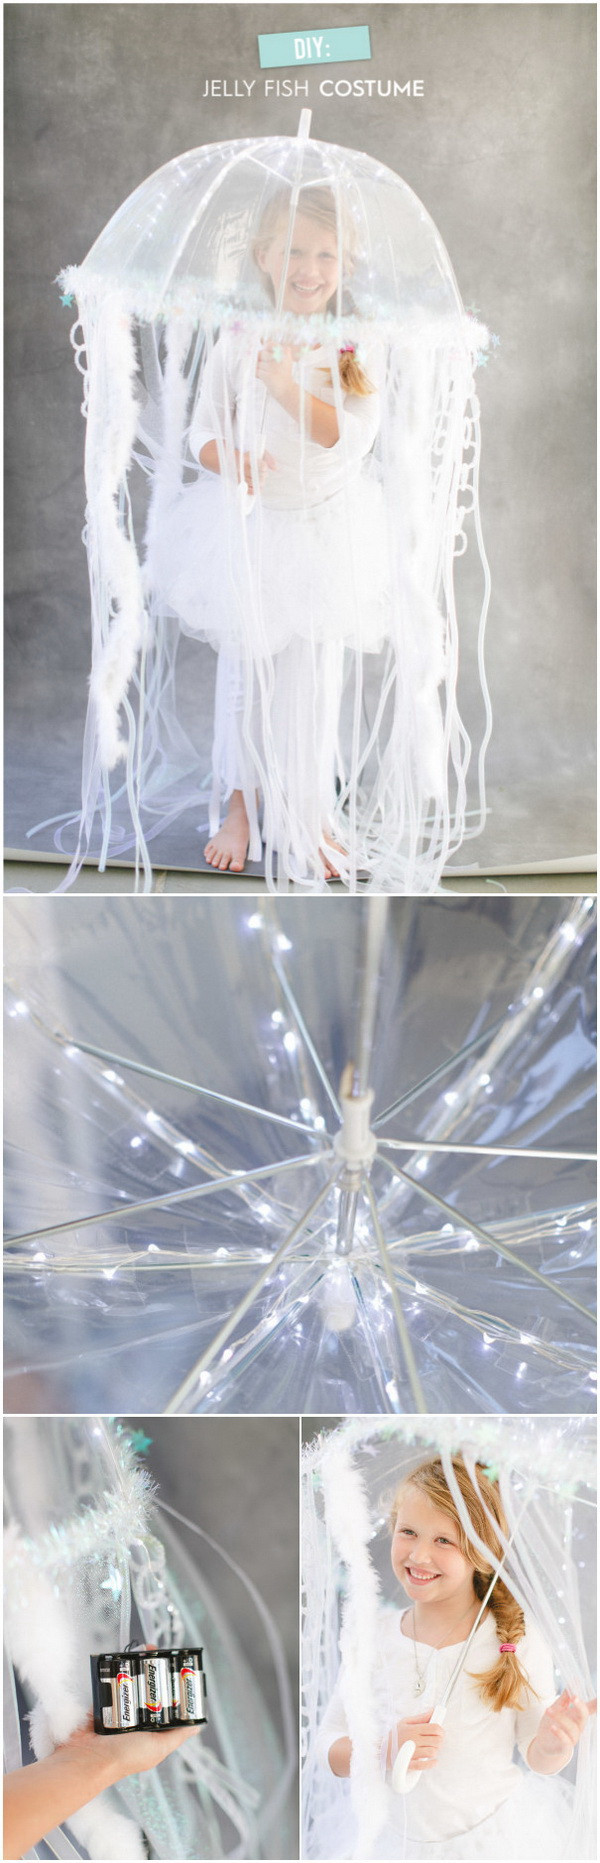 DIY Jellyfish Costume
 20 Creative DIY Halloween Costumes for Kids with Lots of